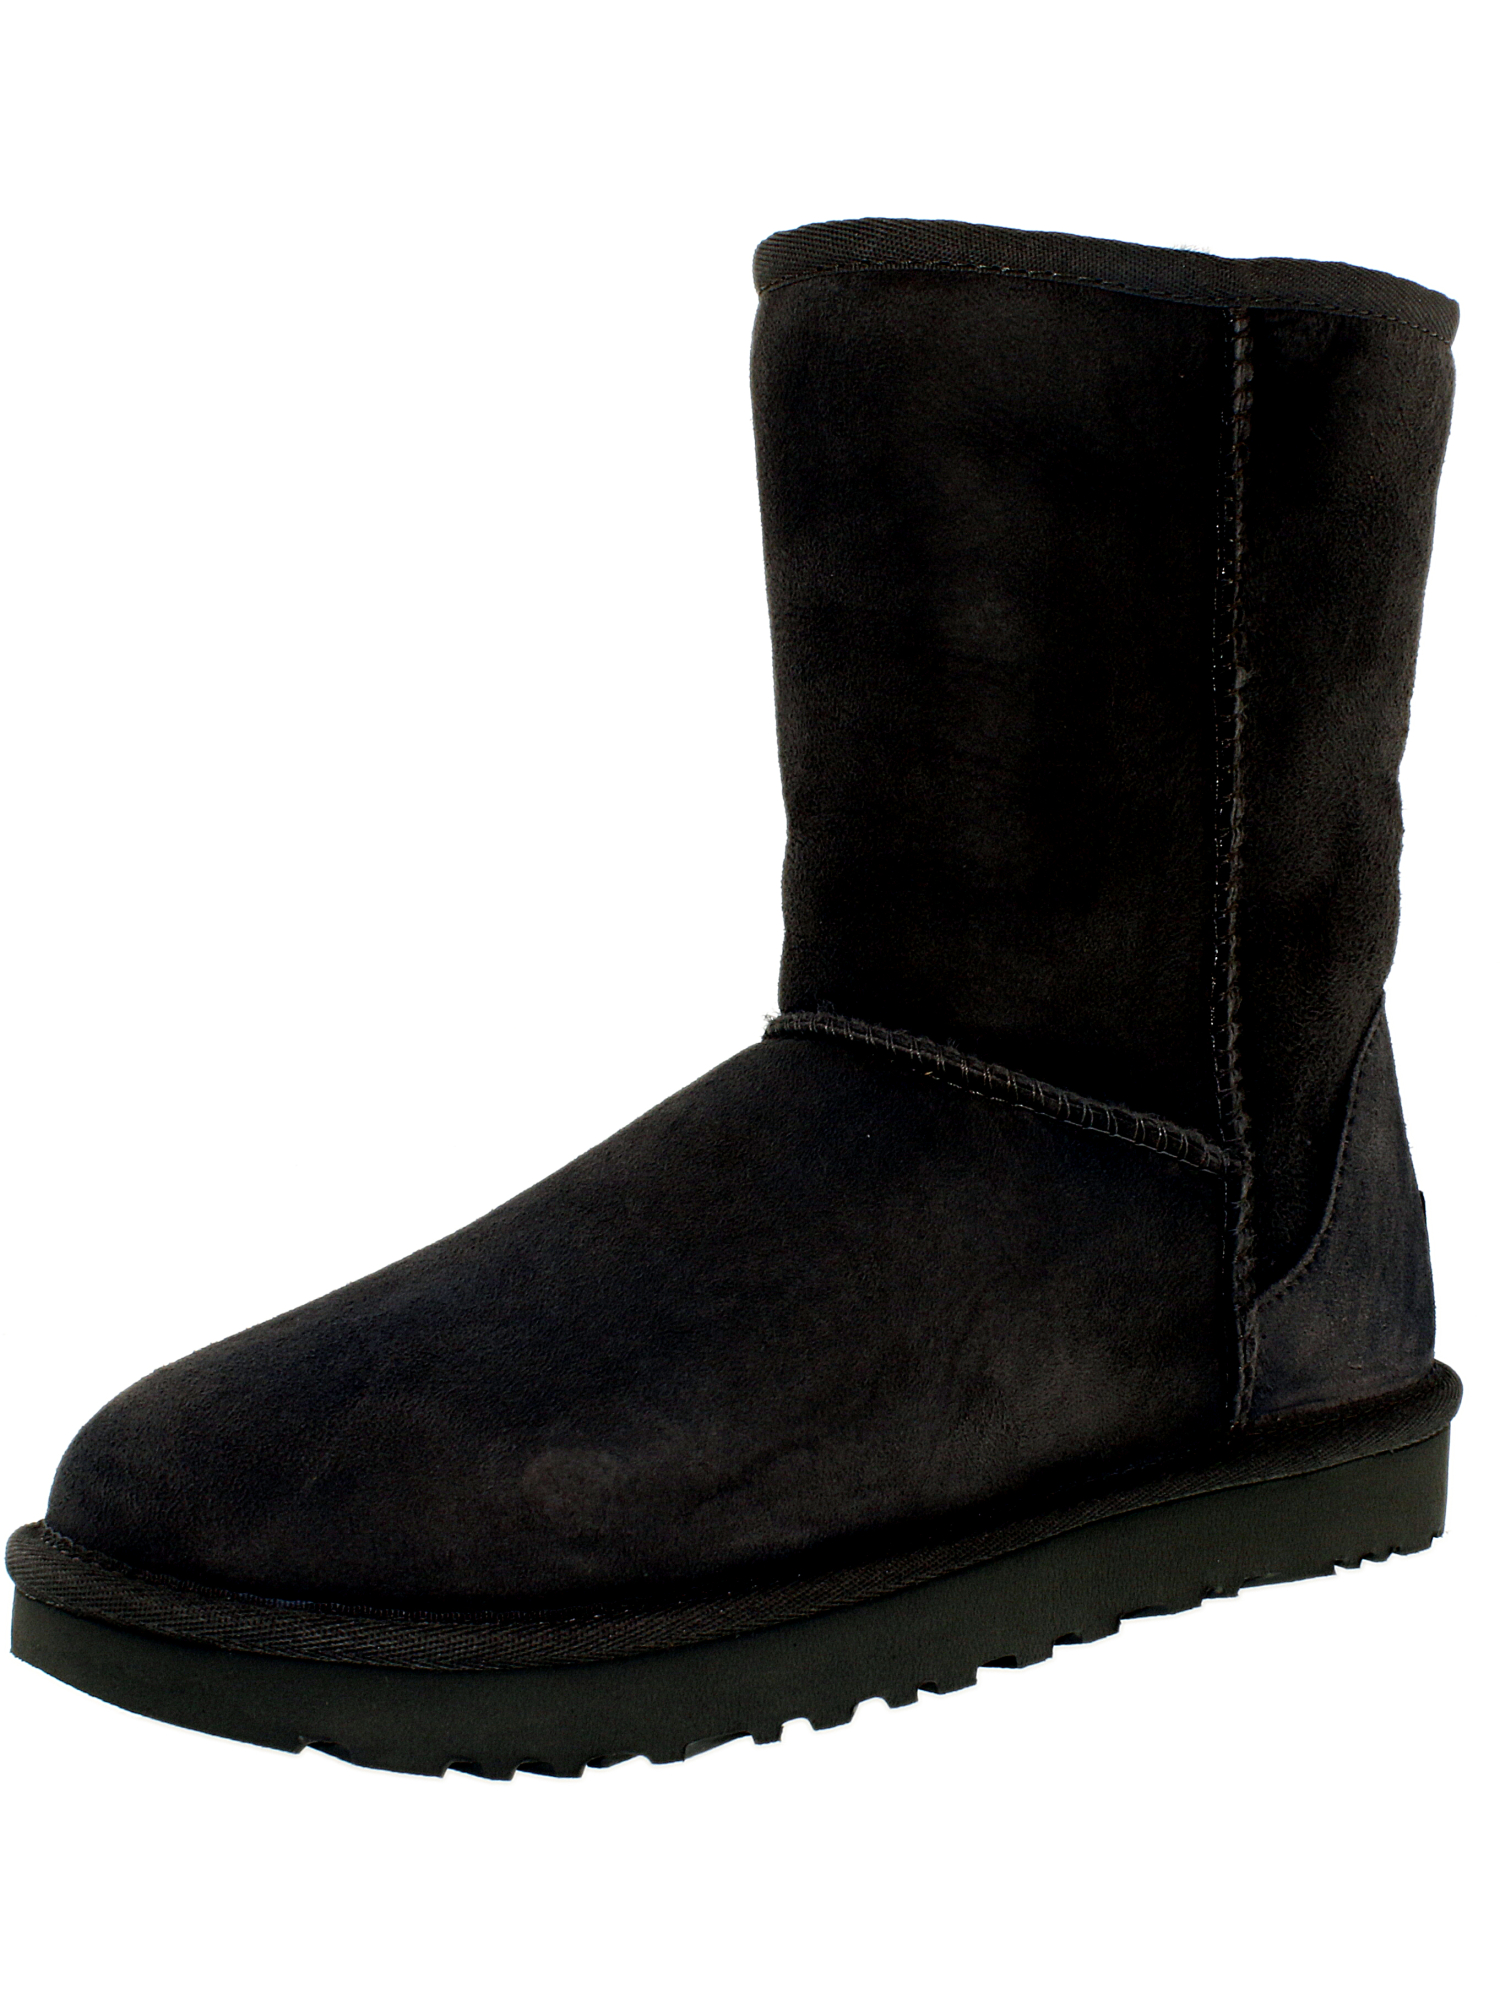 Ugg Women's Classic Short II Ankle-High Suede Boot | eBay